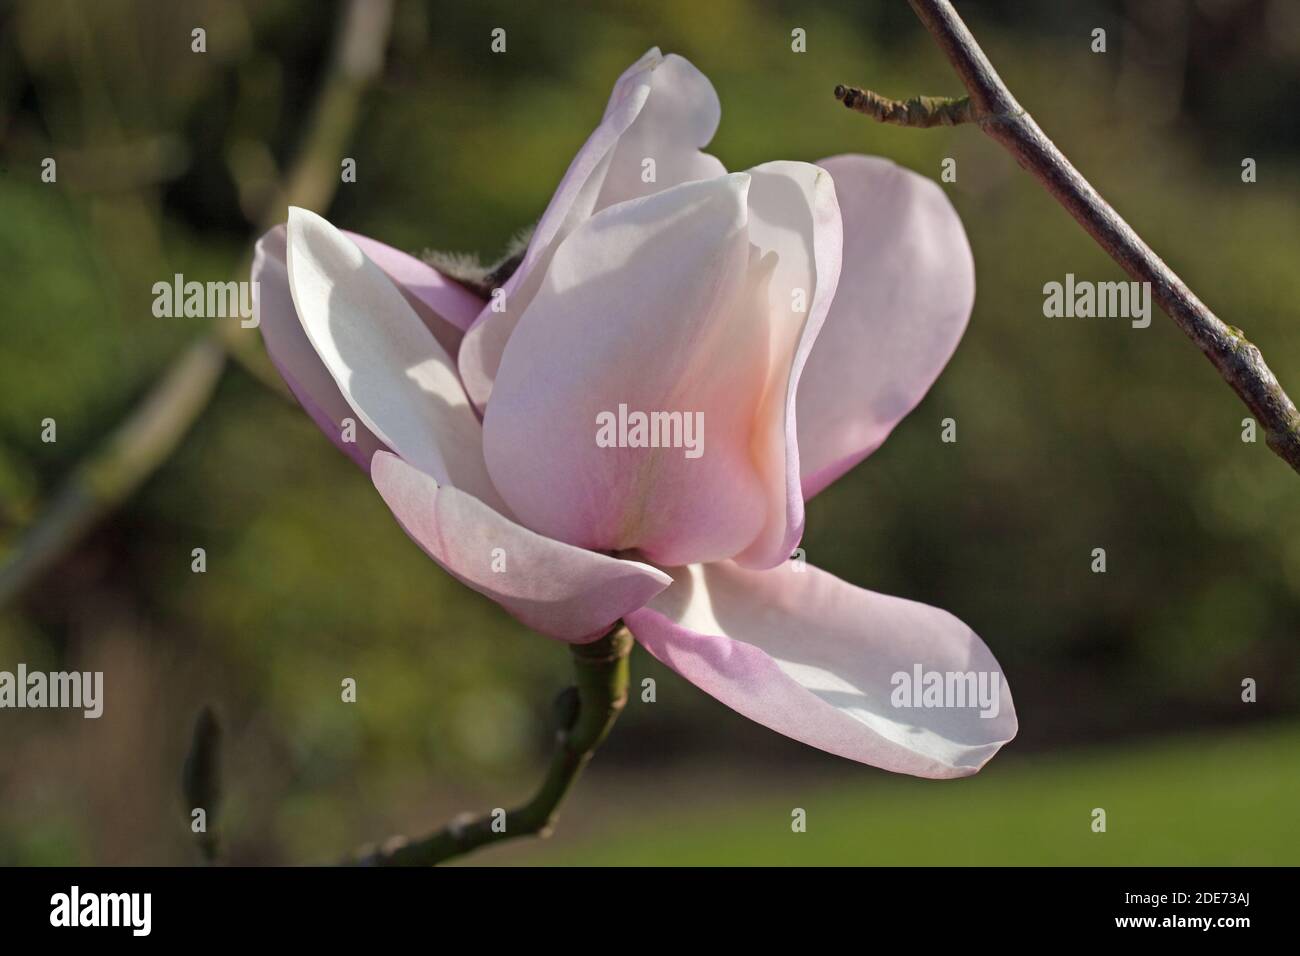 Magnolia Flower, (Magnolia soulangiana). Early spring flowering small tree or shrub. Cultivated garden plant. Stock Photo